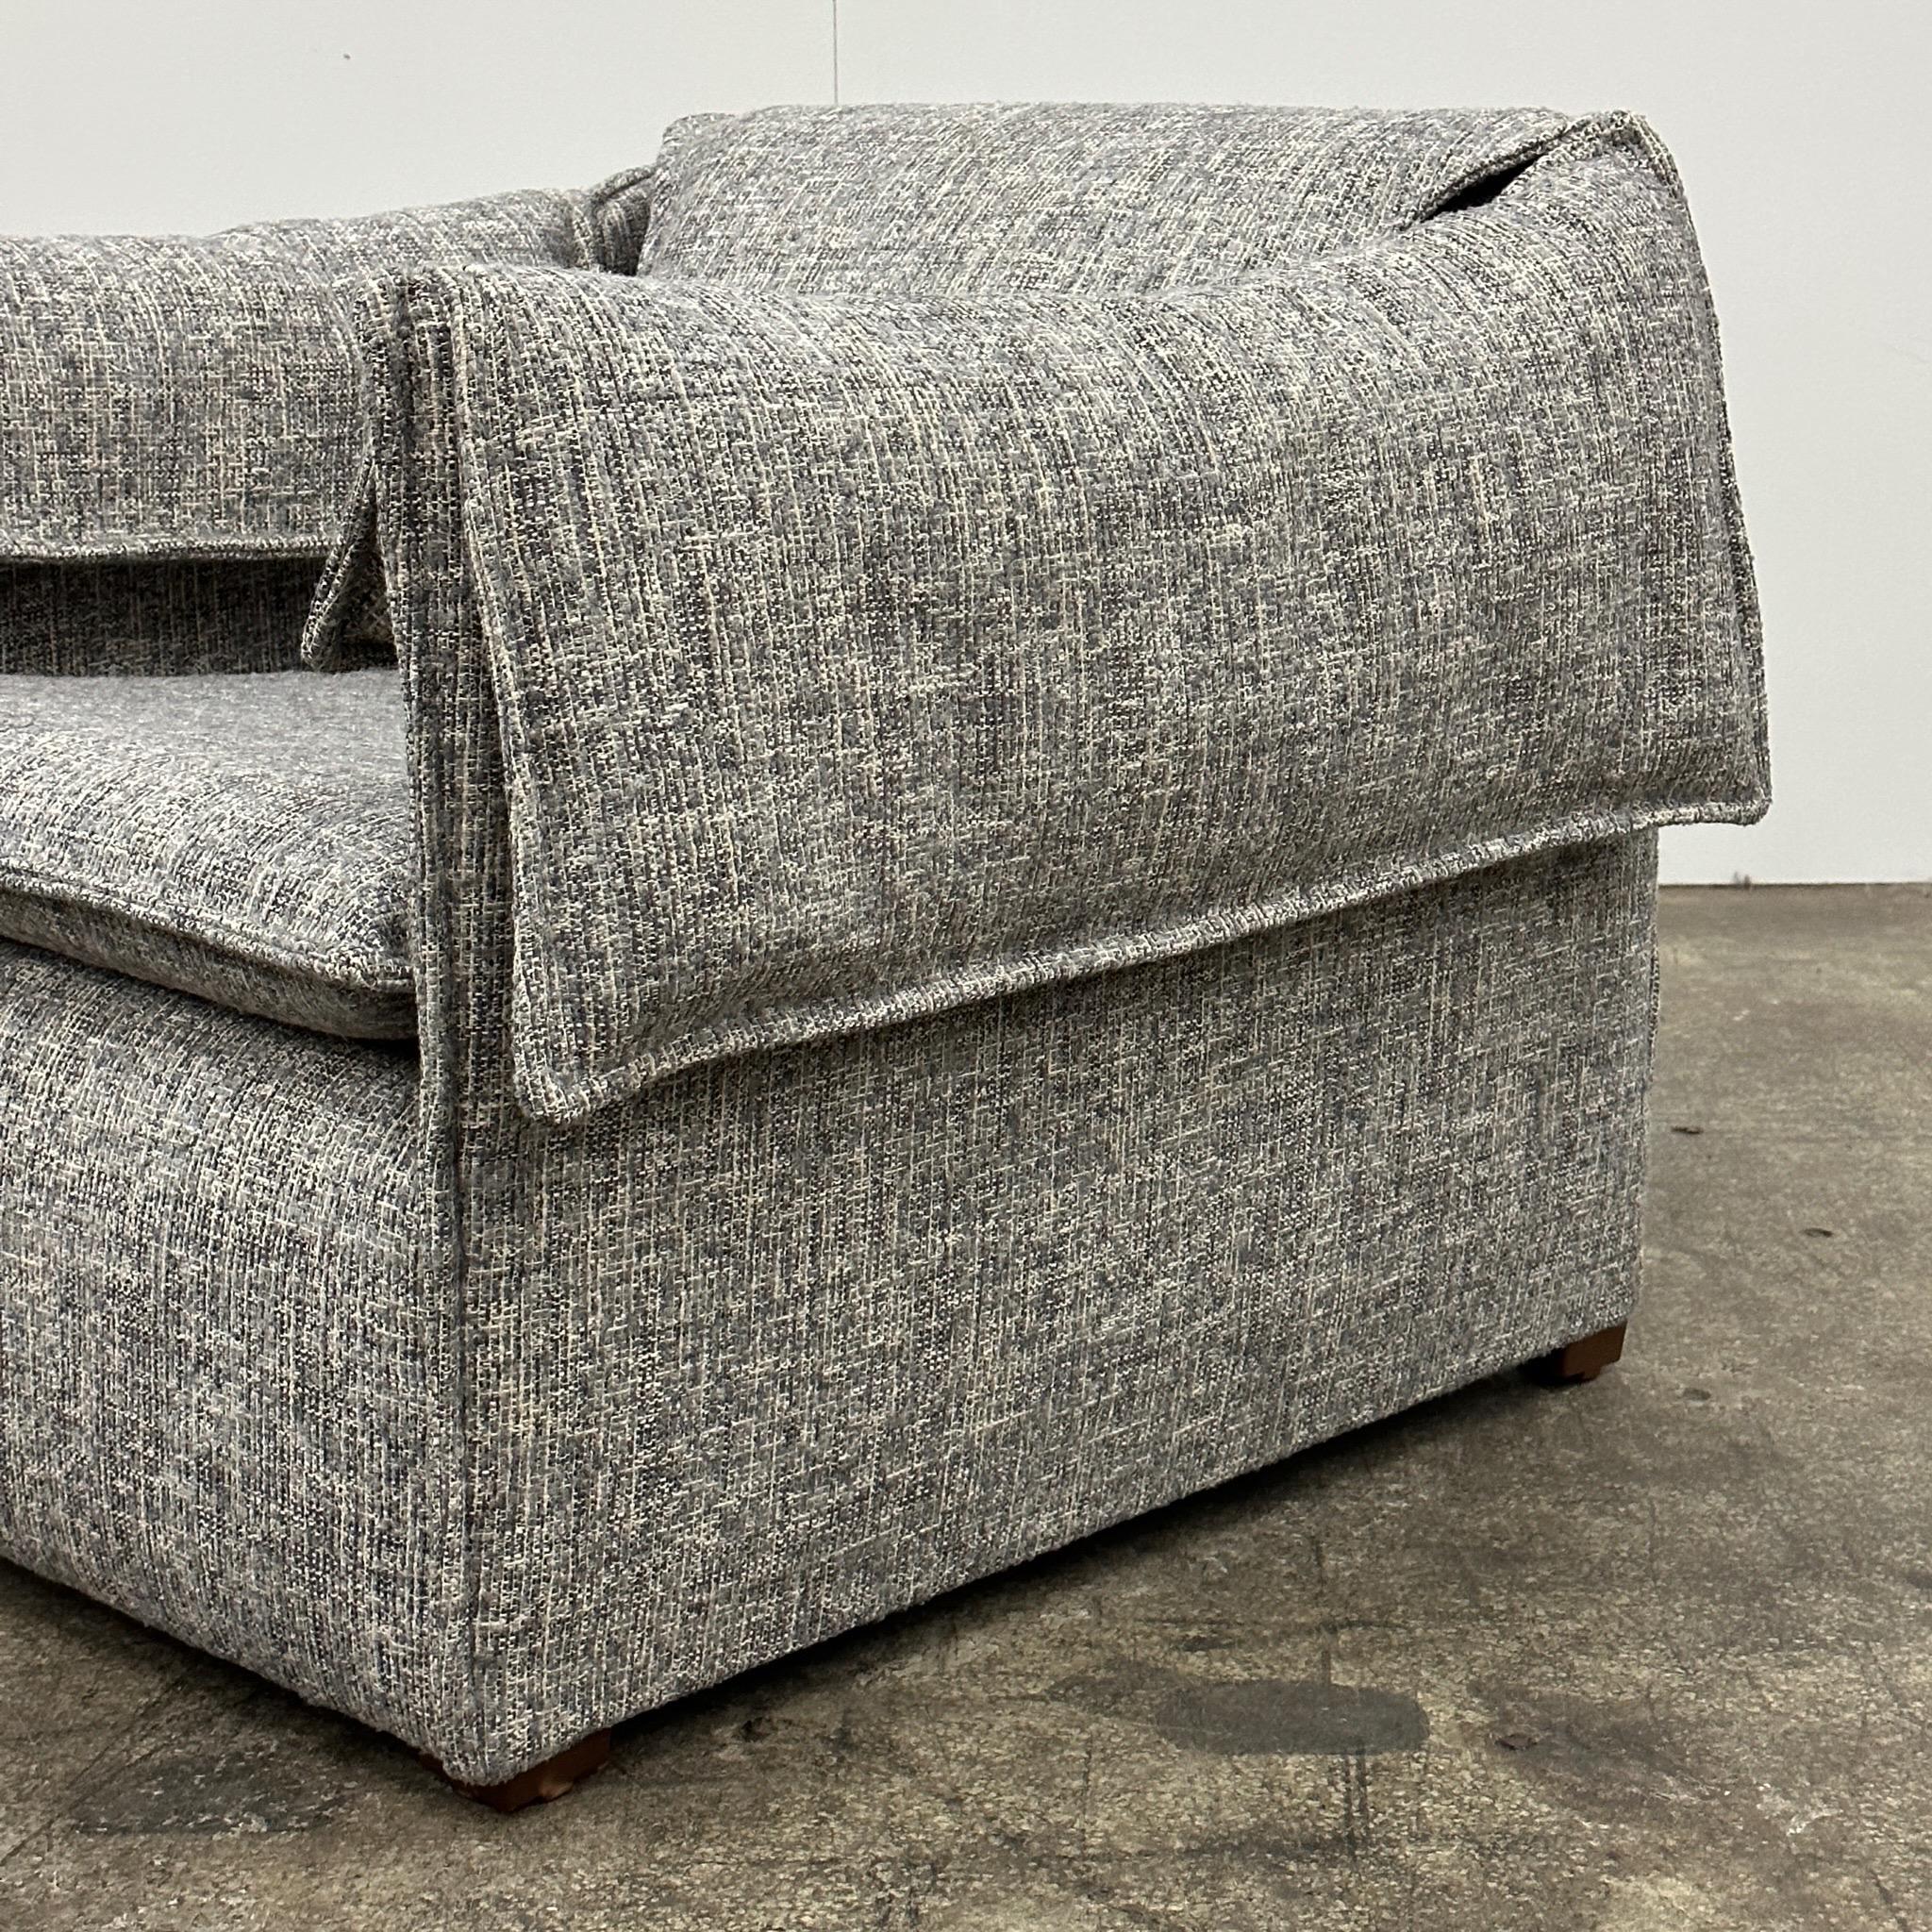 c. 1970s. Reupholstered in grey/white chenille. Matching loveseat available. Made in Denmark. Removable arms.